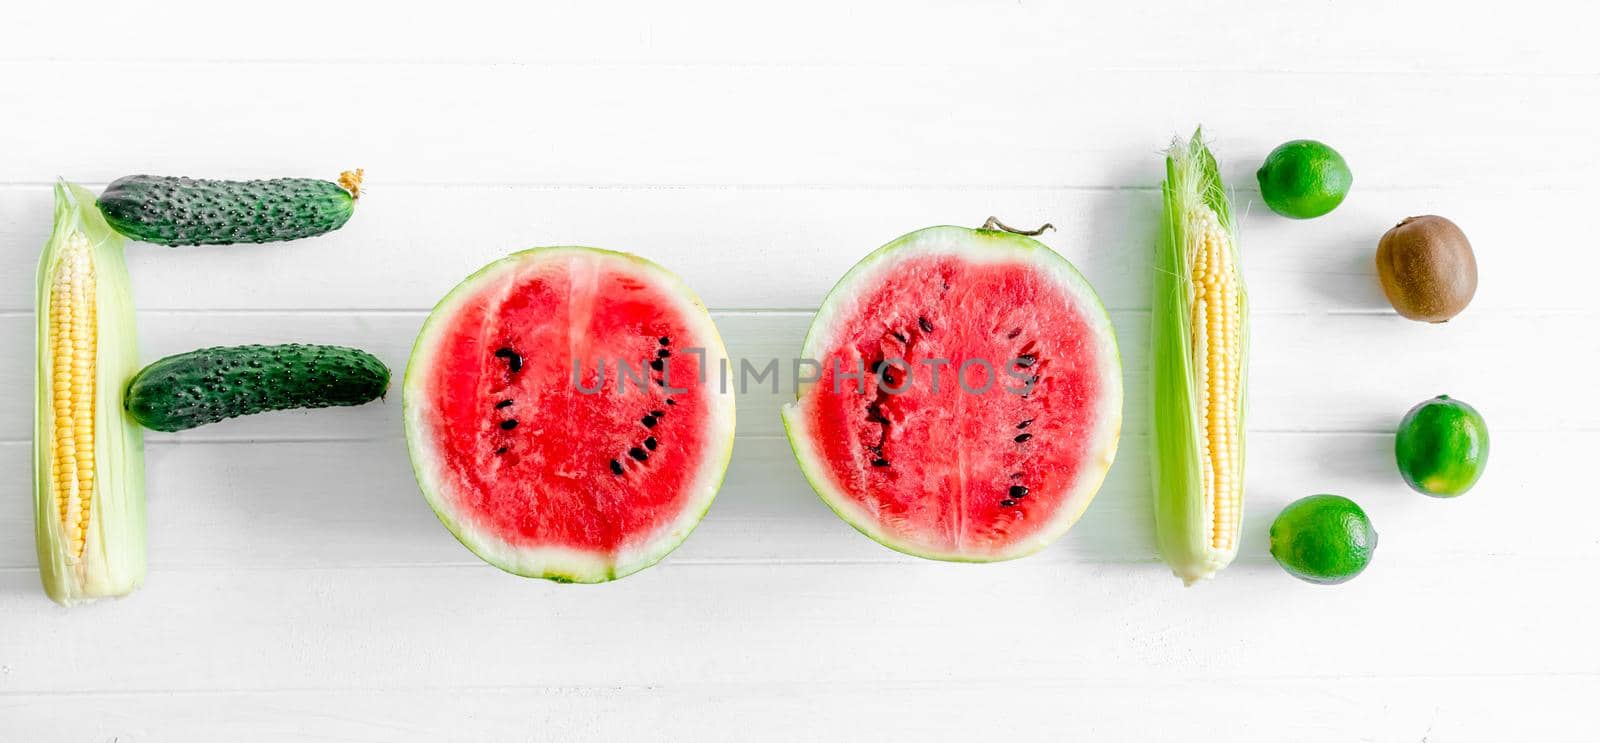 Fresh tasty berriess ,fruits and vegetables set in a word on the white background